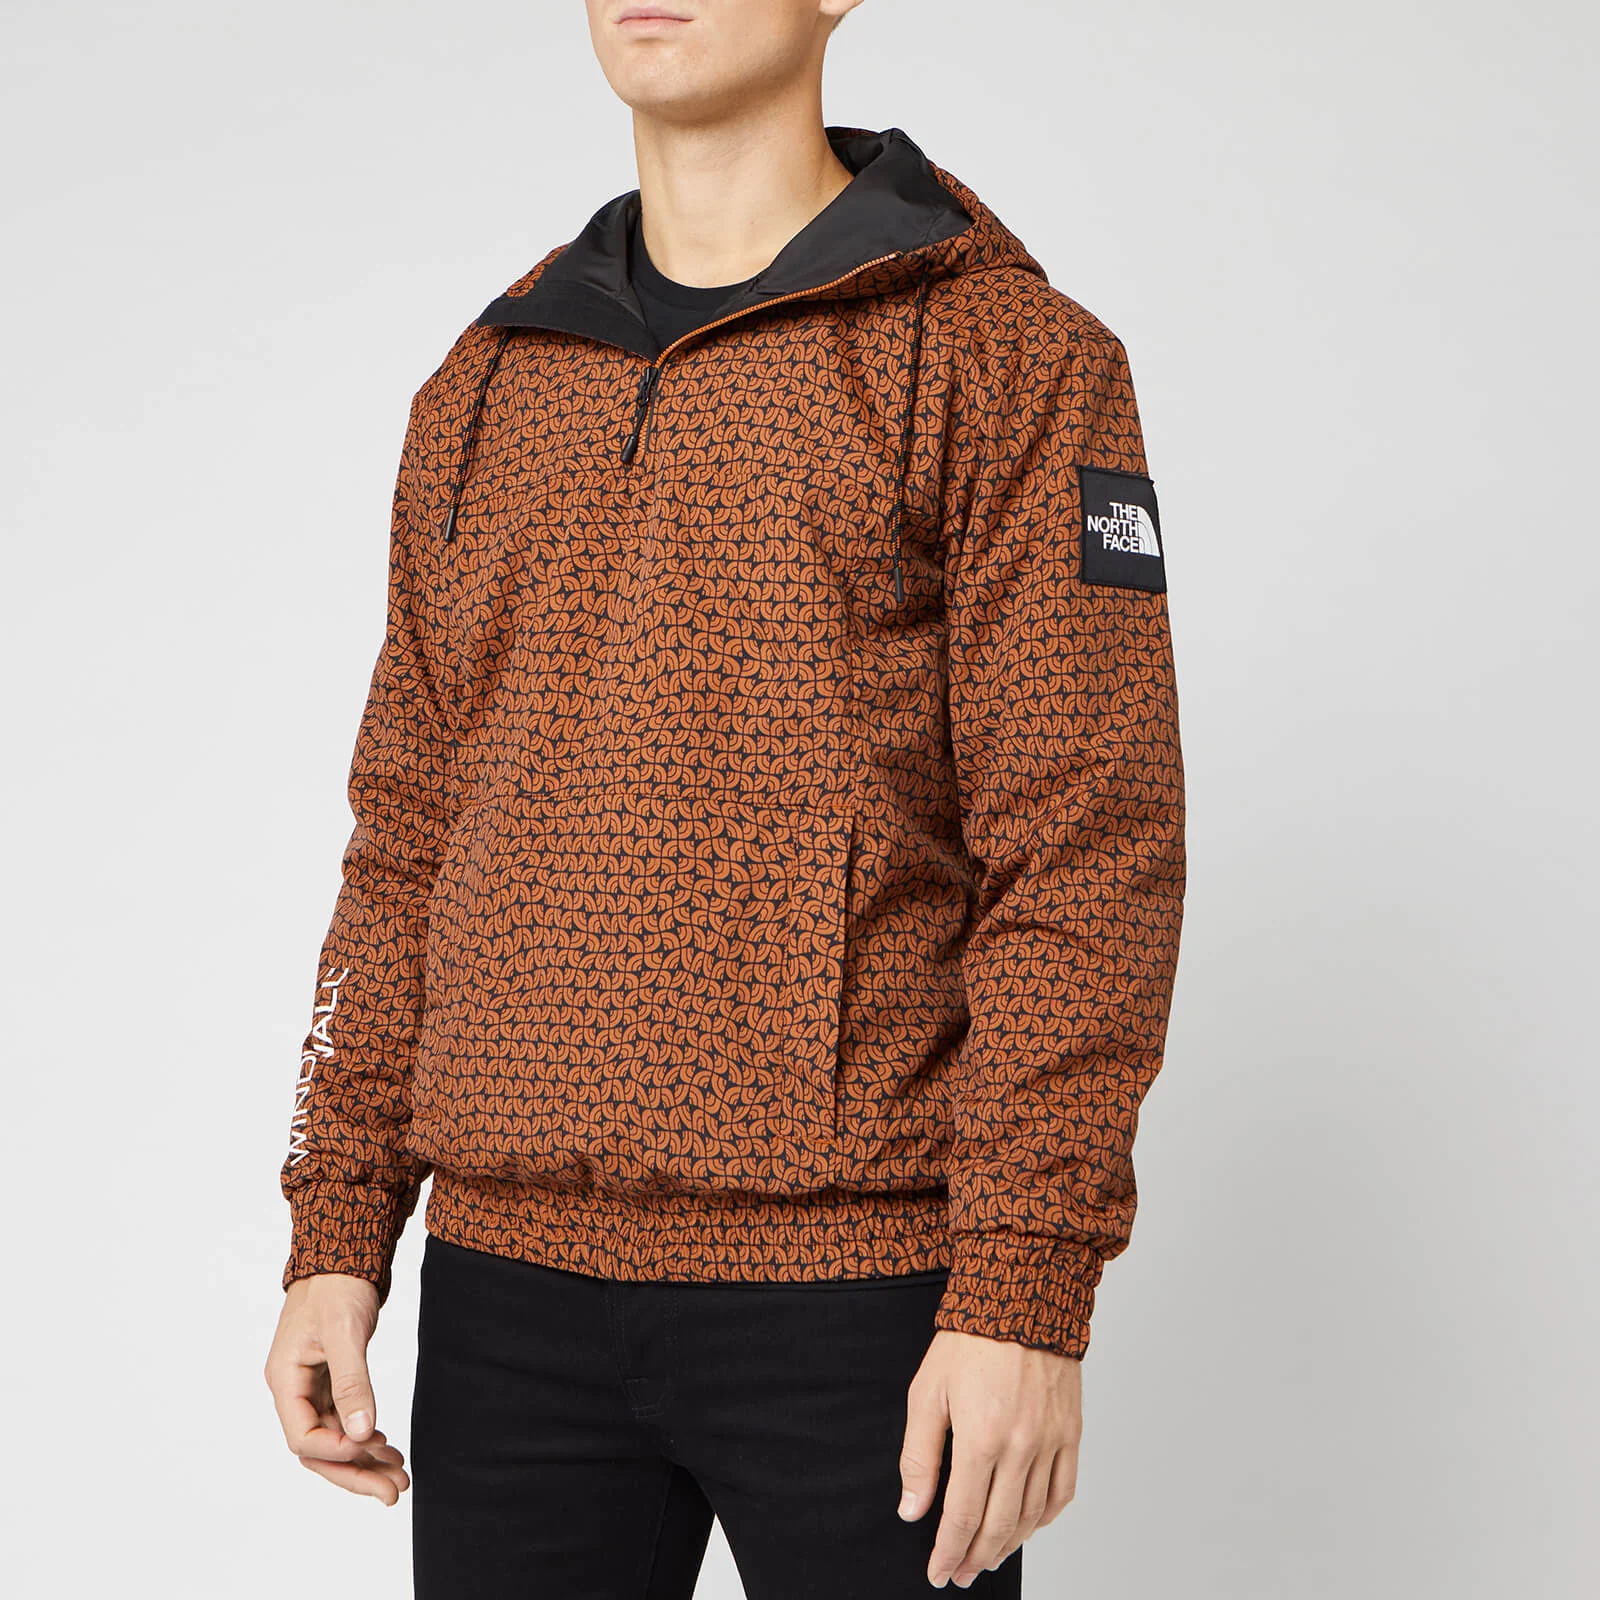 The North Face Men's Windwall Insulated Anorak - Caramel Café Image 1